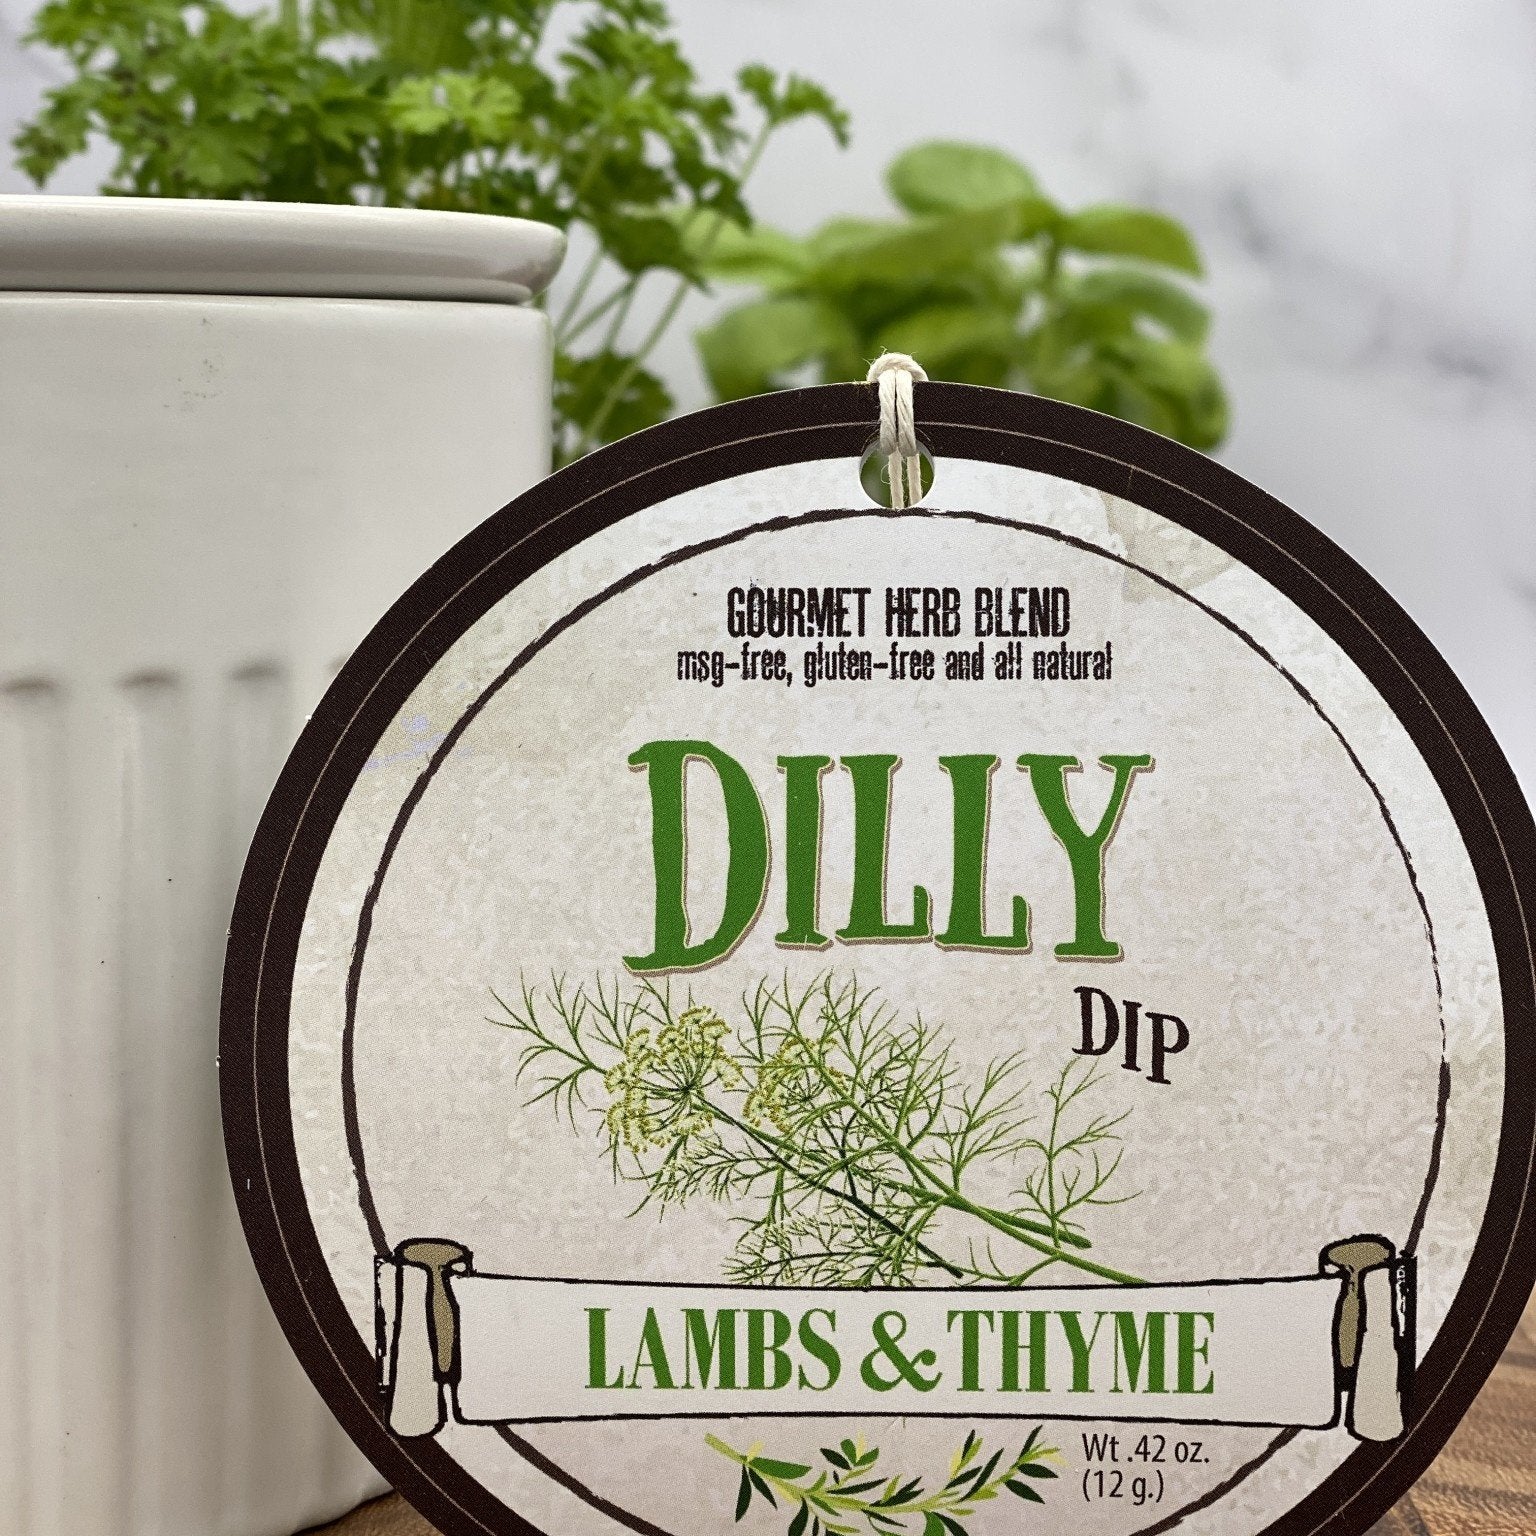 Lambs & Thyme Herb Dips Dilly